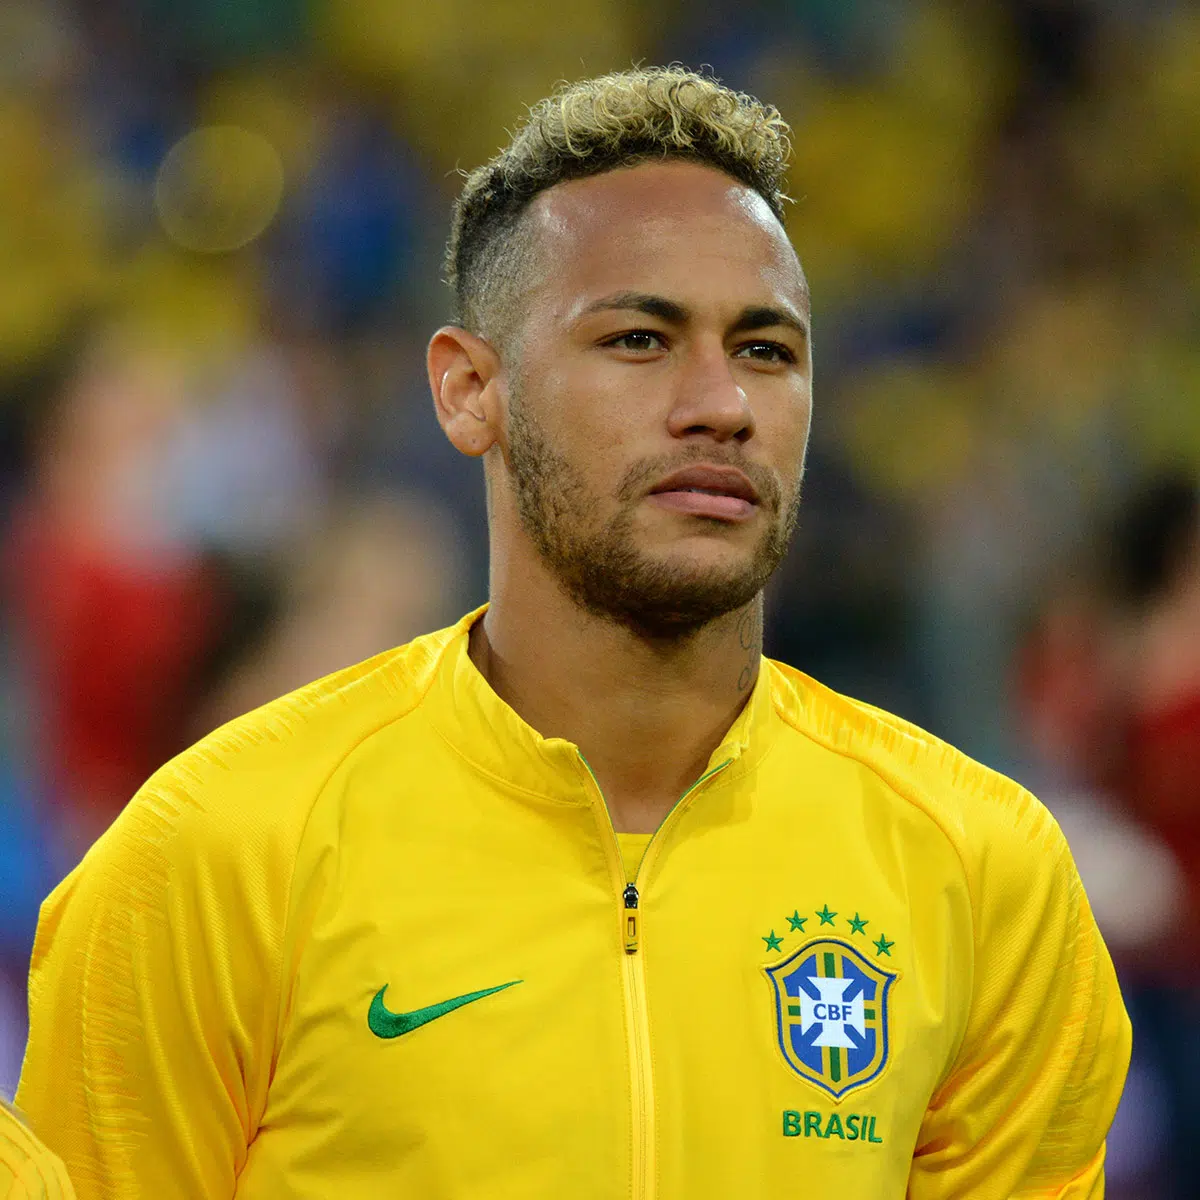 Neymar faces possible $1m fine over Brazil property work